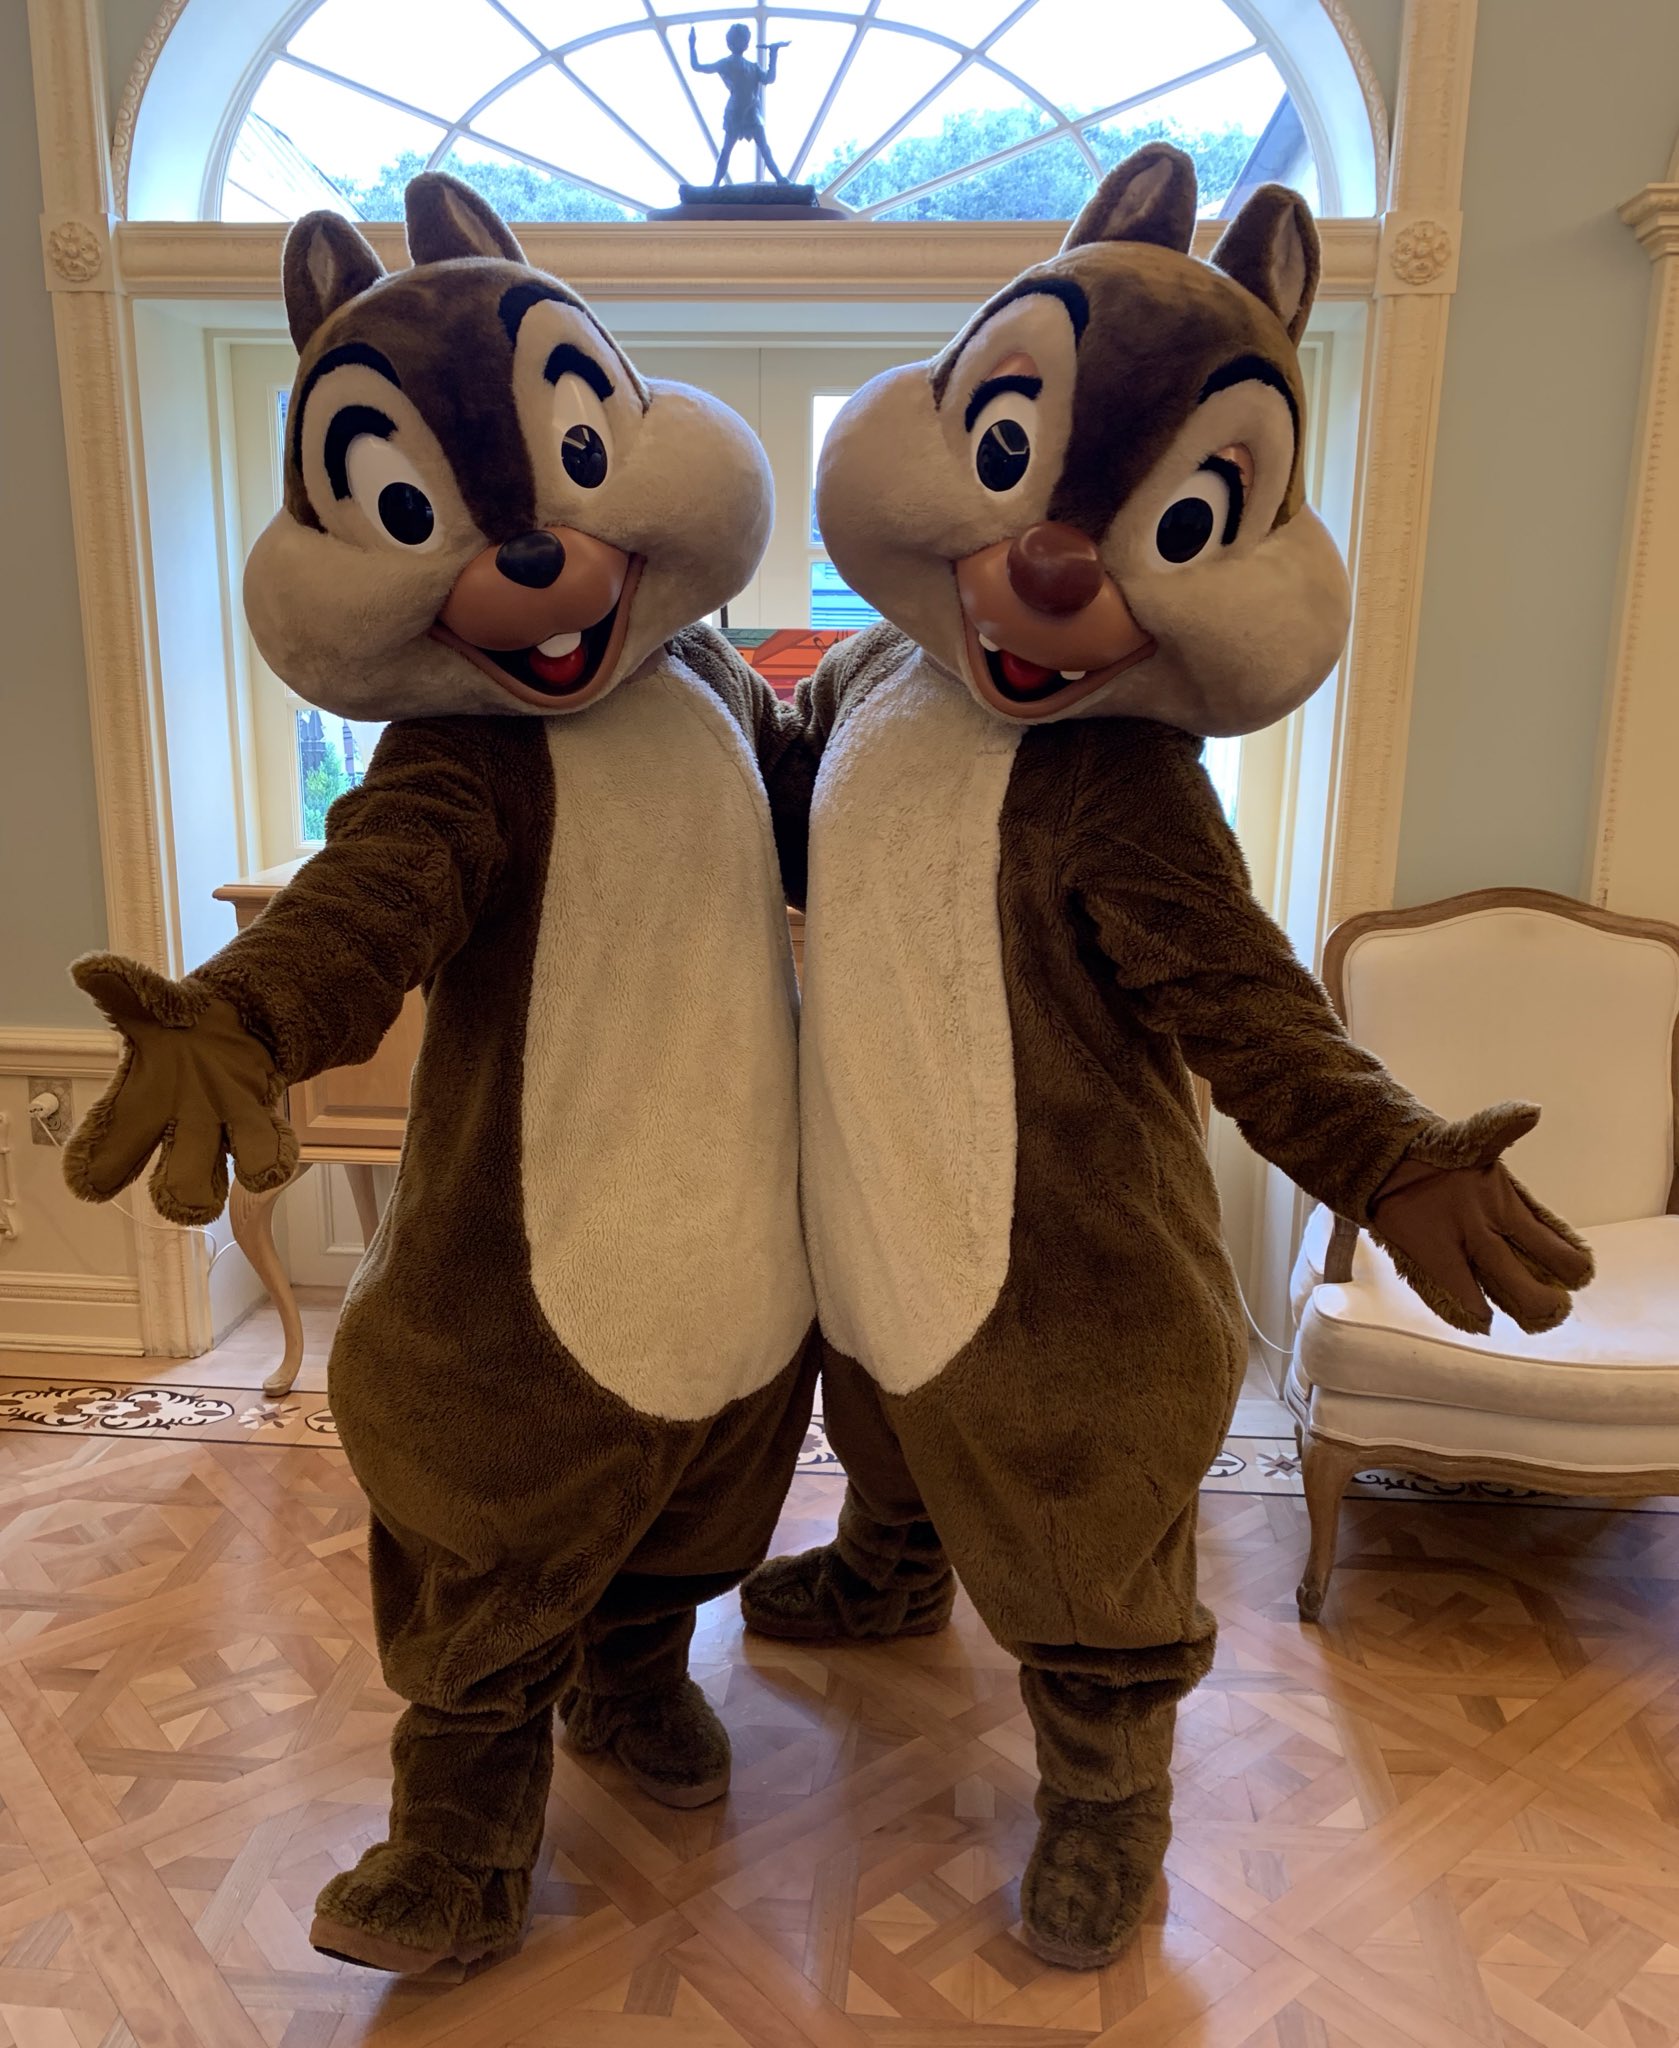 360 Of Disney Chip And Dale Visited Club33 Today At Disneyland Dlr Chipanddale Club33disneyland チップ デール チップとデール T Co X0ken1umxz Twitter